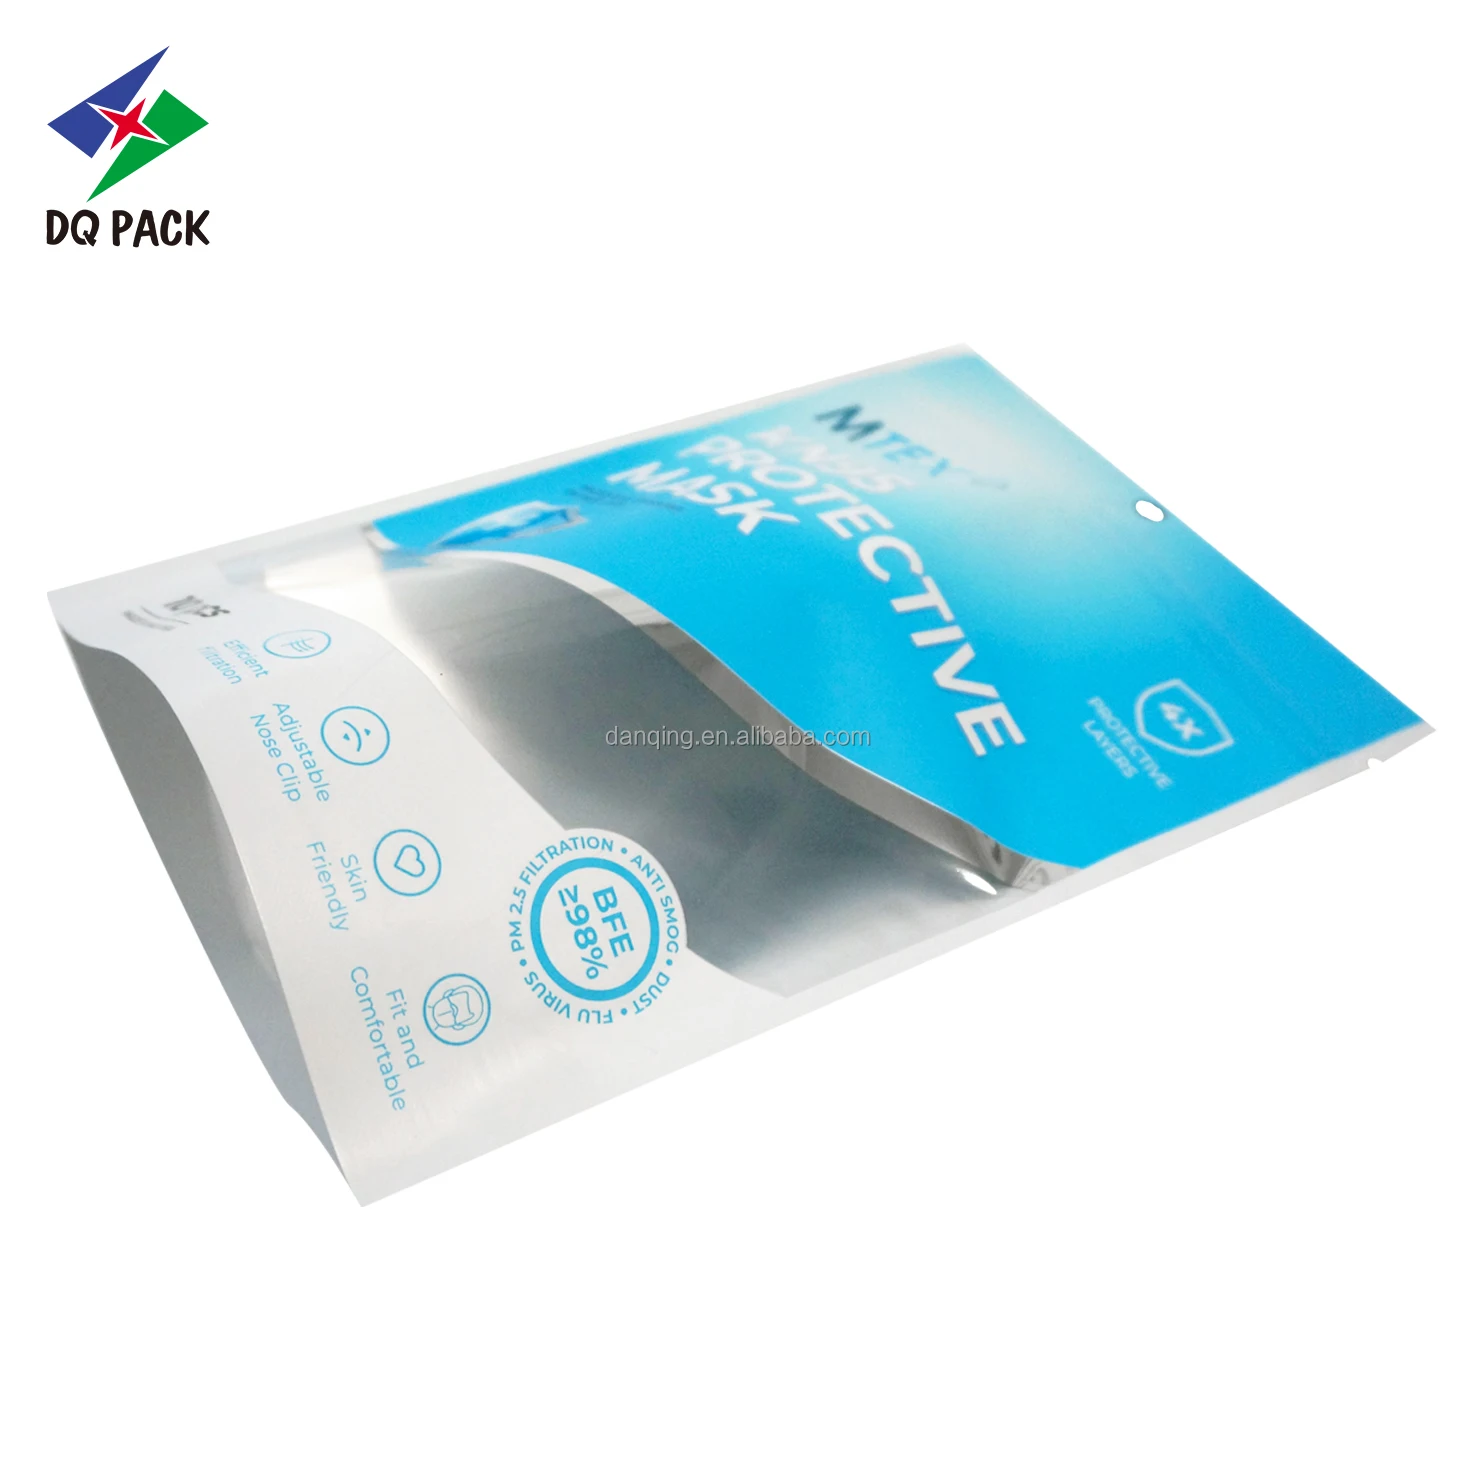 DQ PACK Hot Sale Protective Masking Plastic Packaging Bag With Window Manufacturer